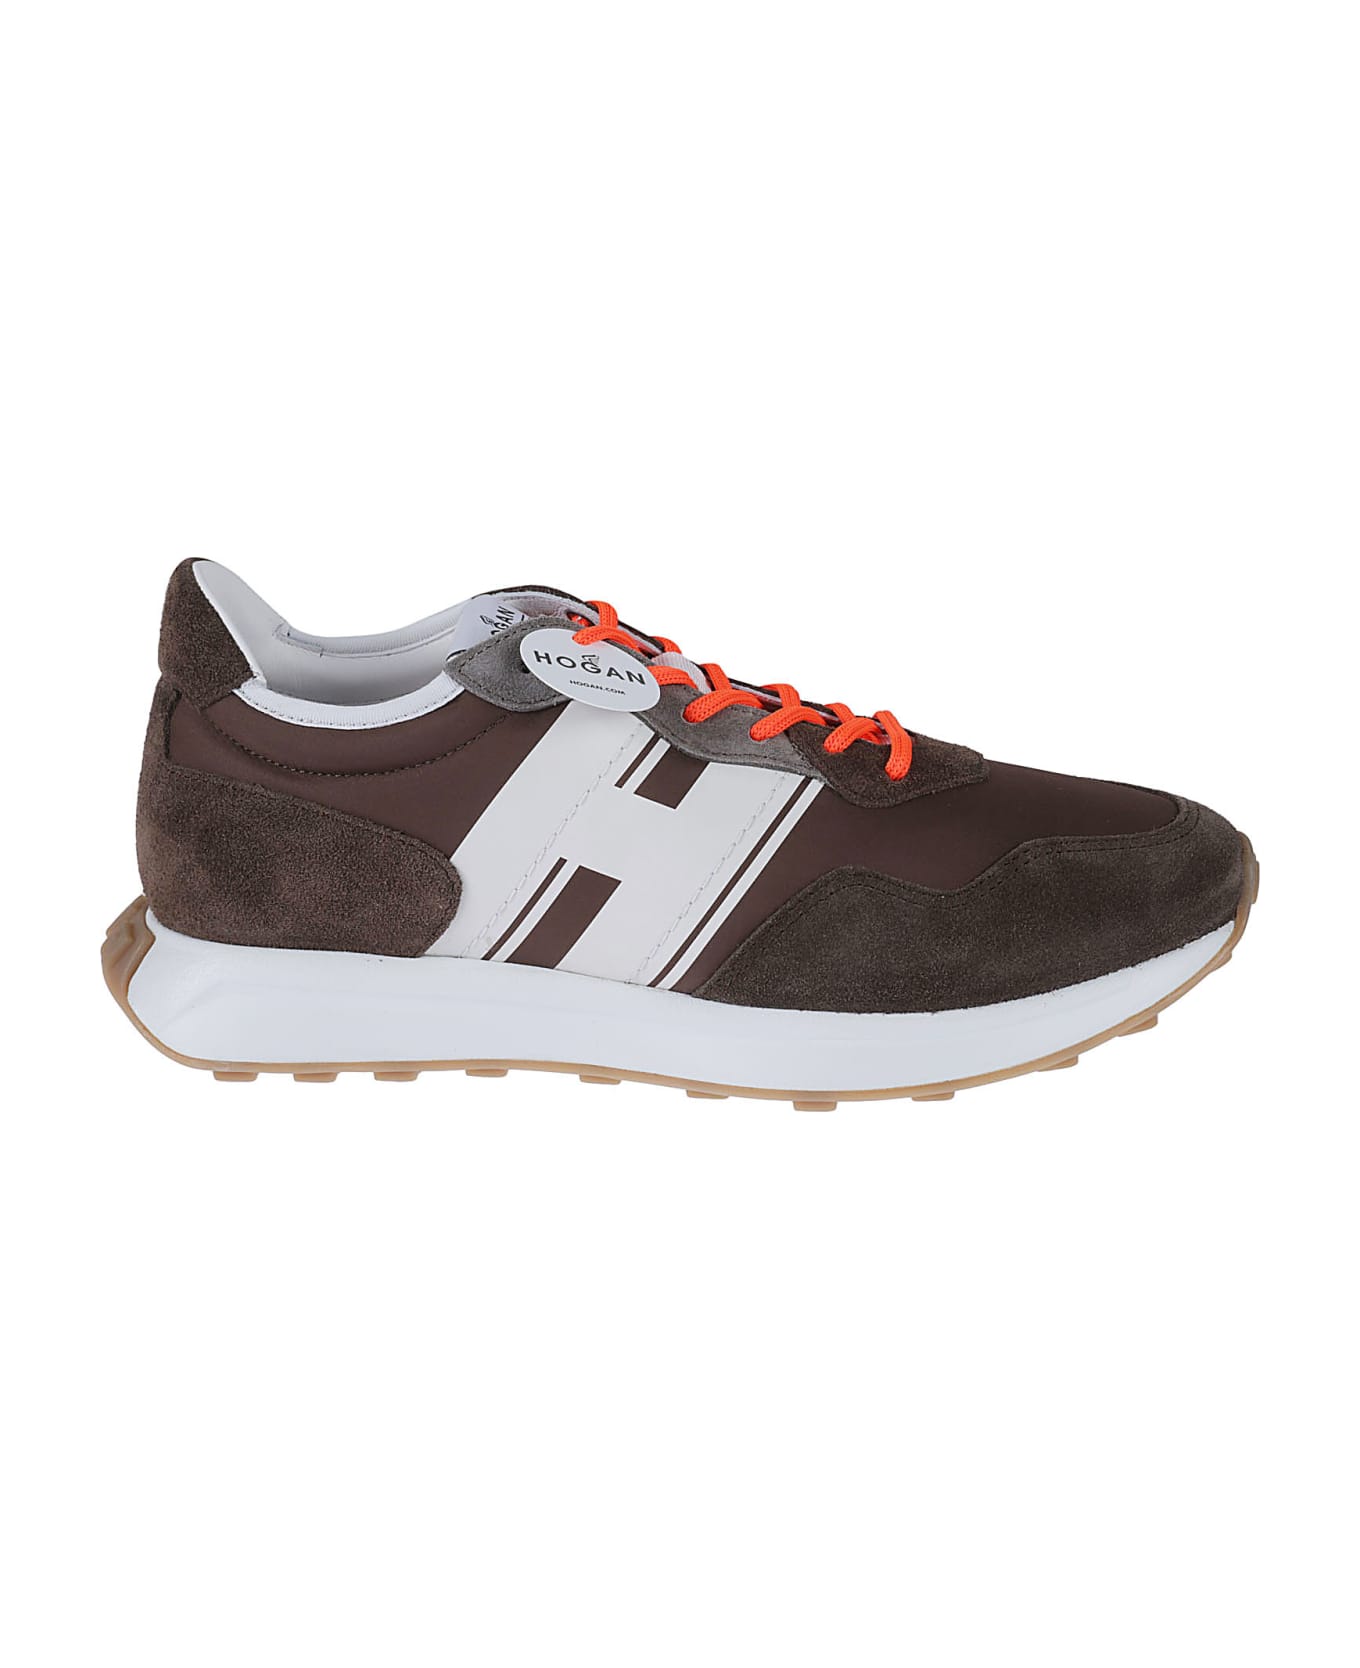 Hogan H601 Lace-up Sneakers - Chocolate